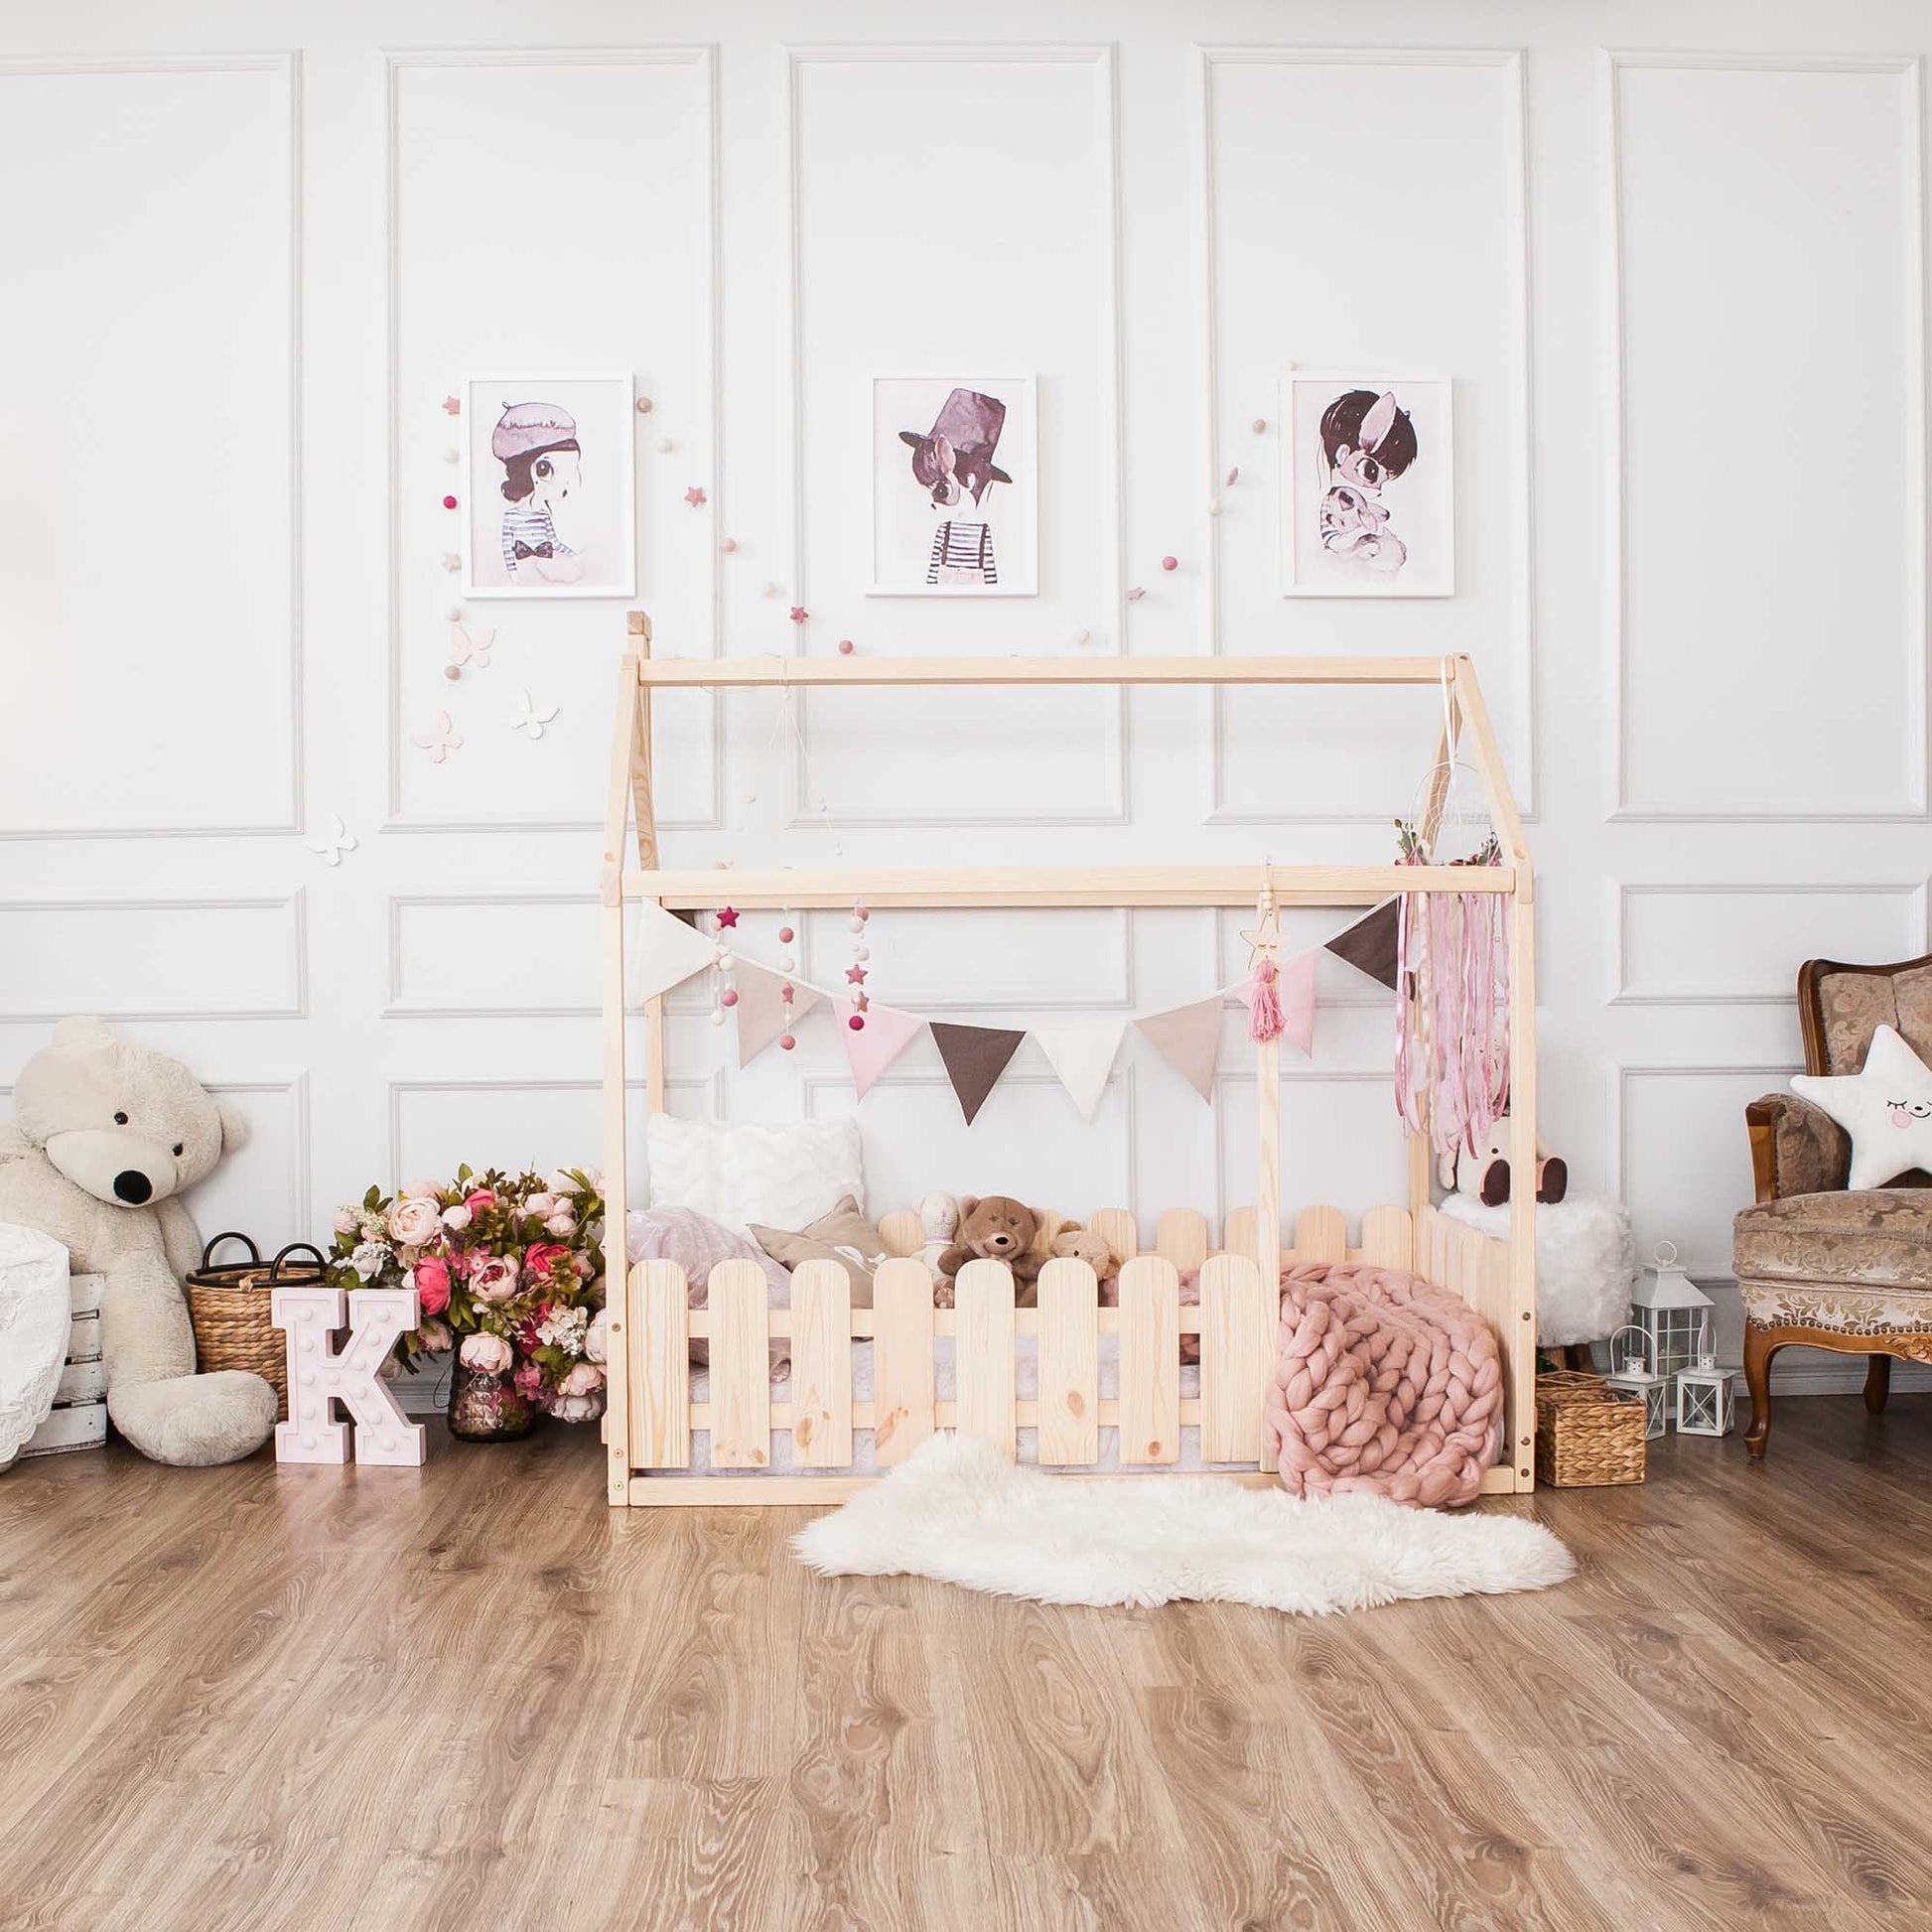 A girl's room with a platform house bed featuring a picket fence and a teddy bear.